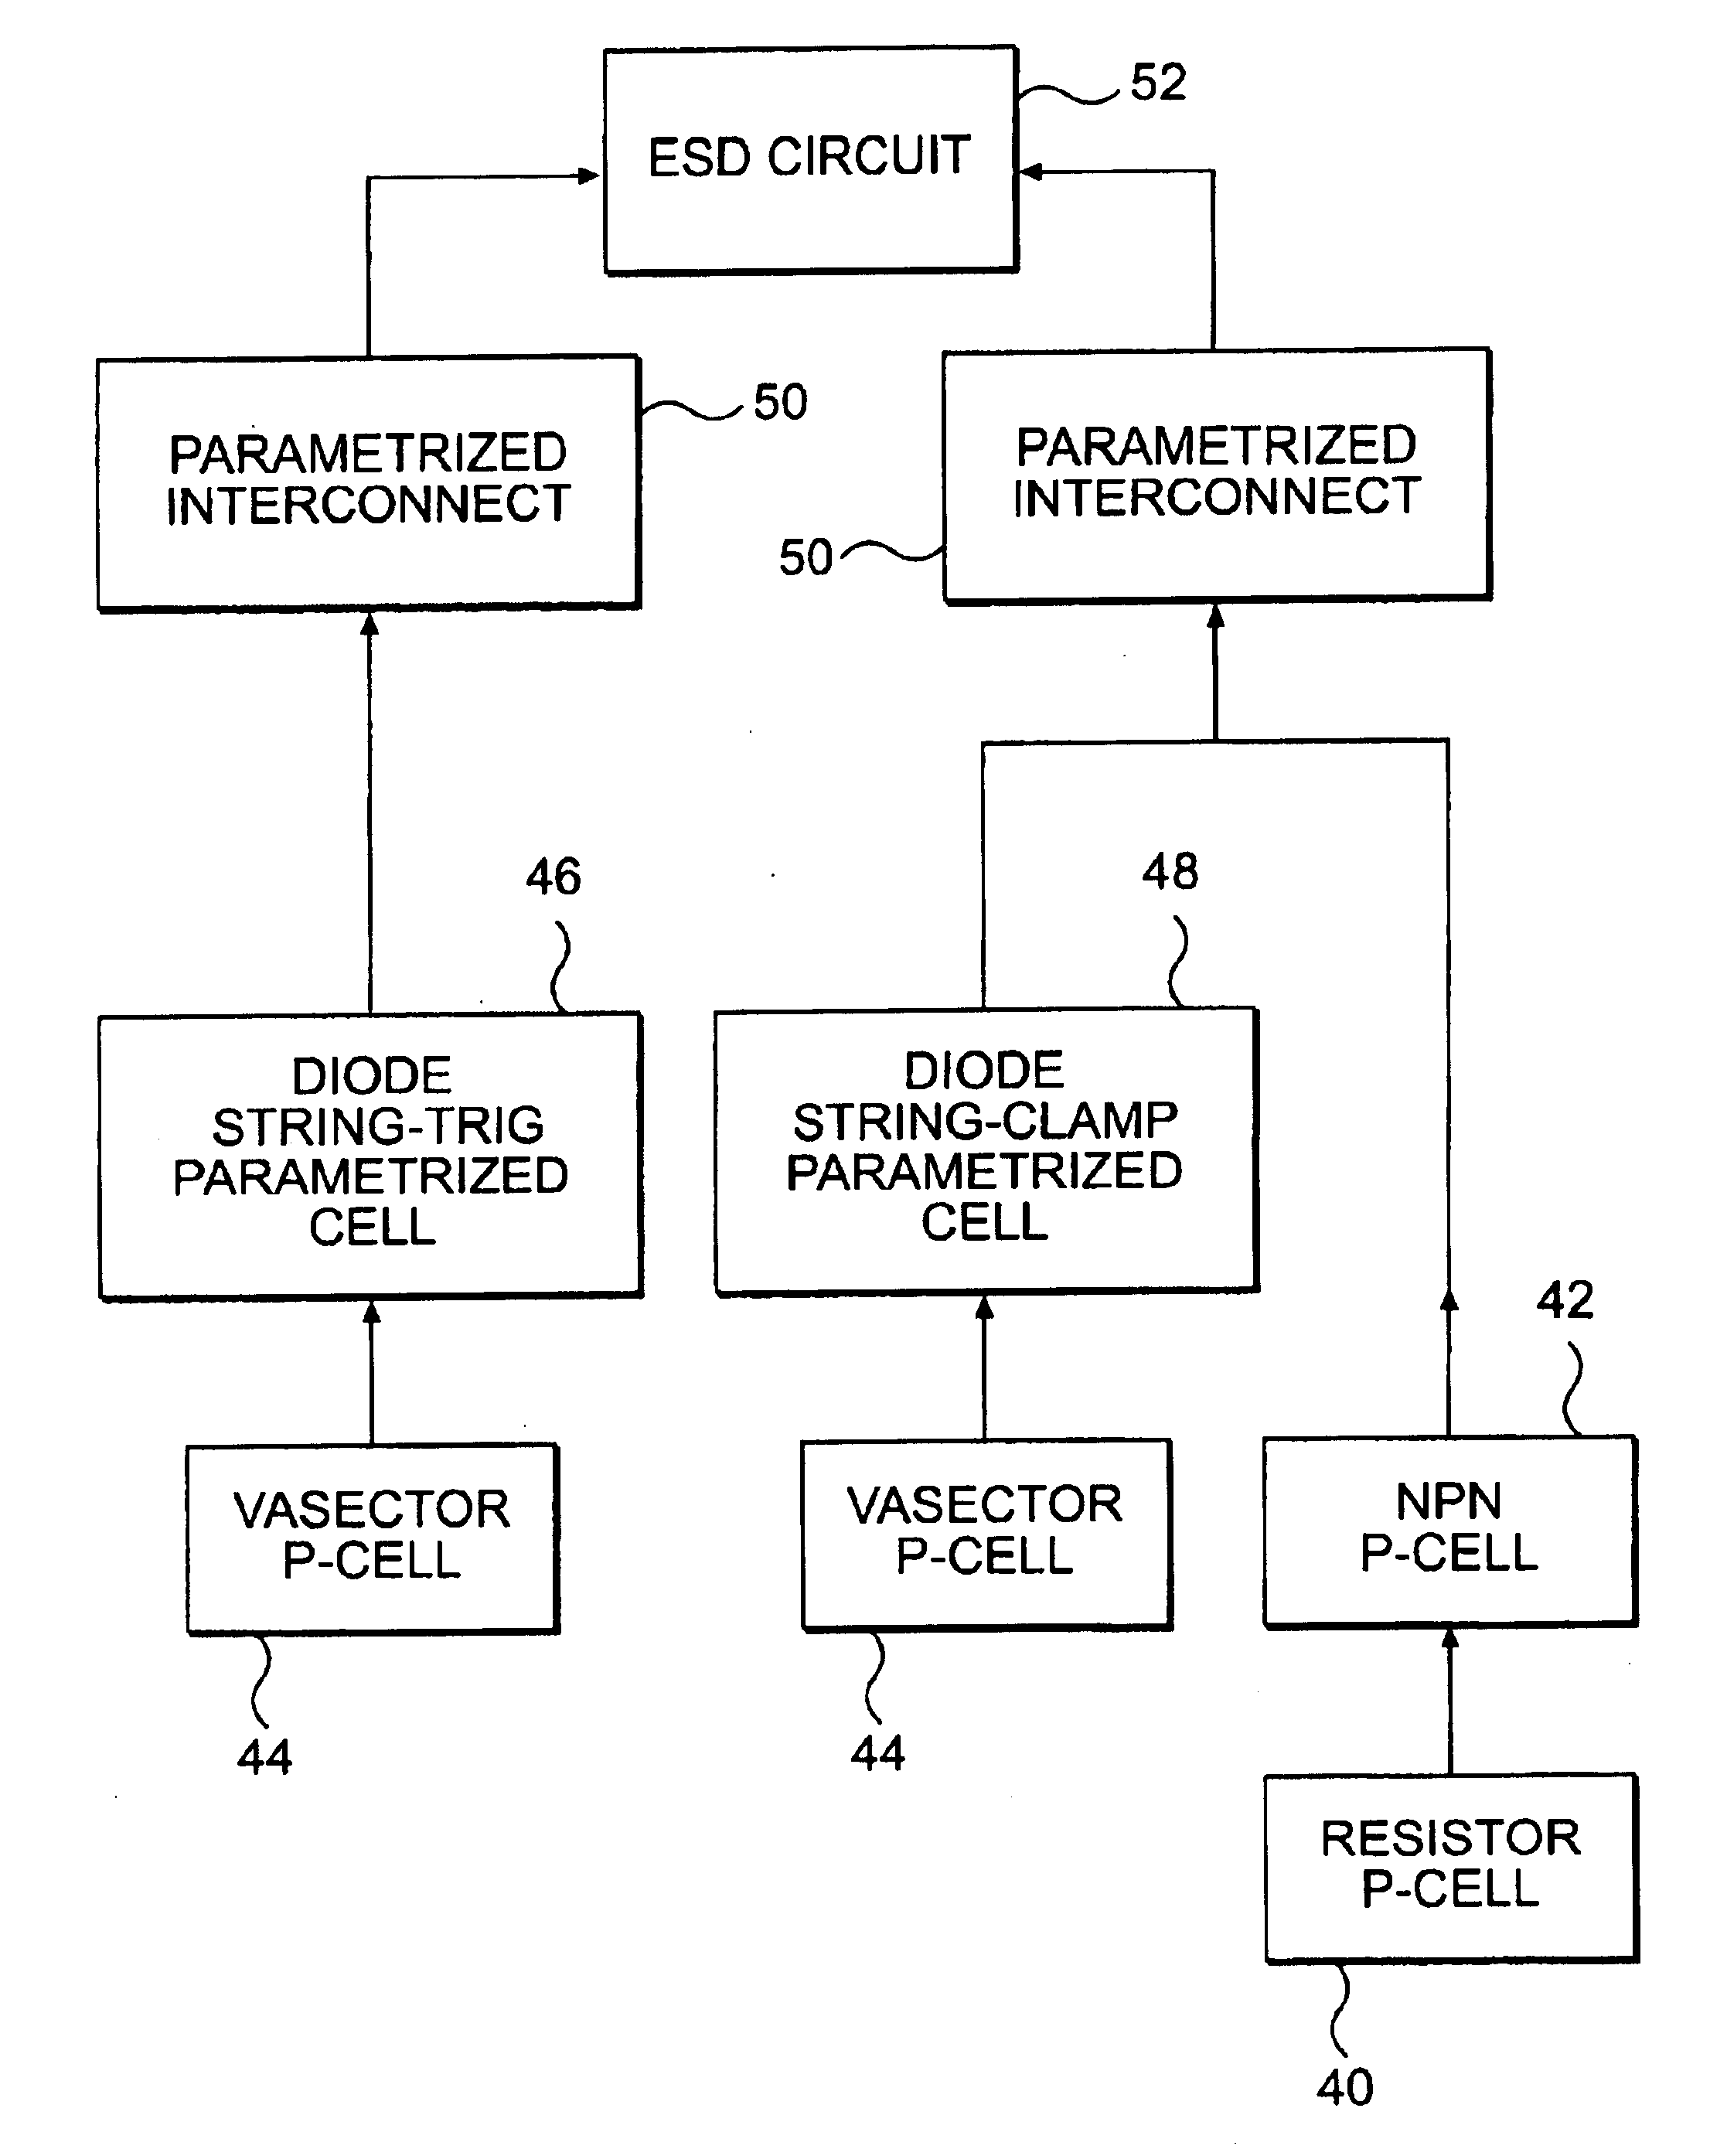 Automated hierarchical parameterized ESD network design and checking system